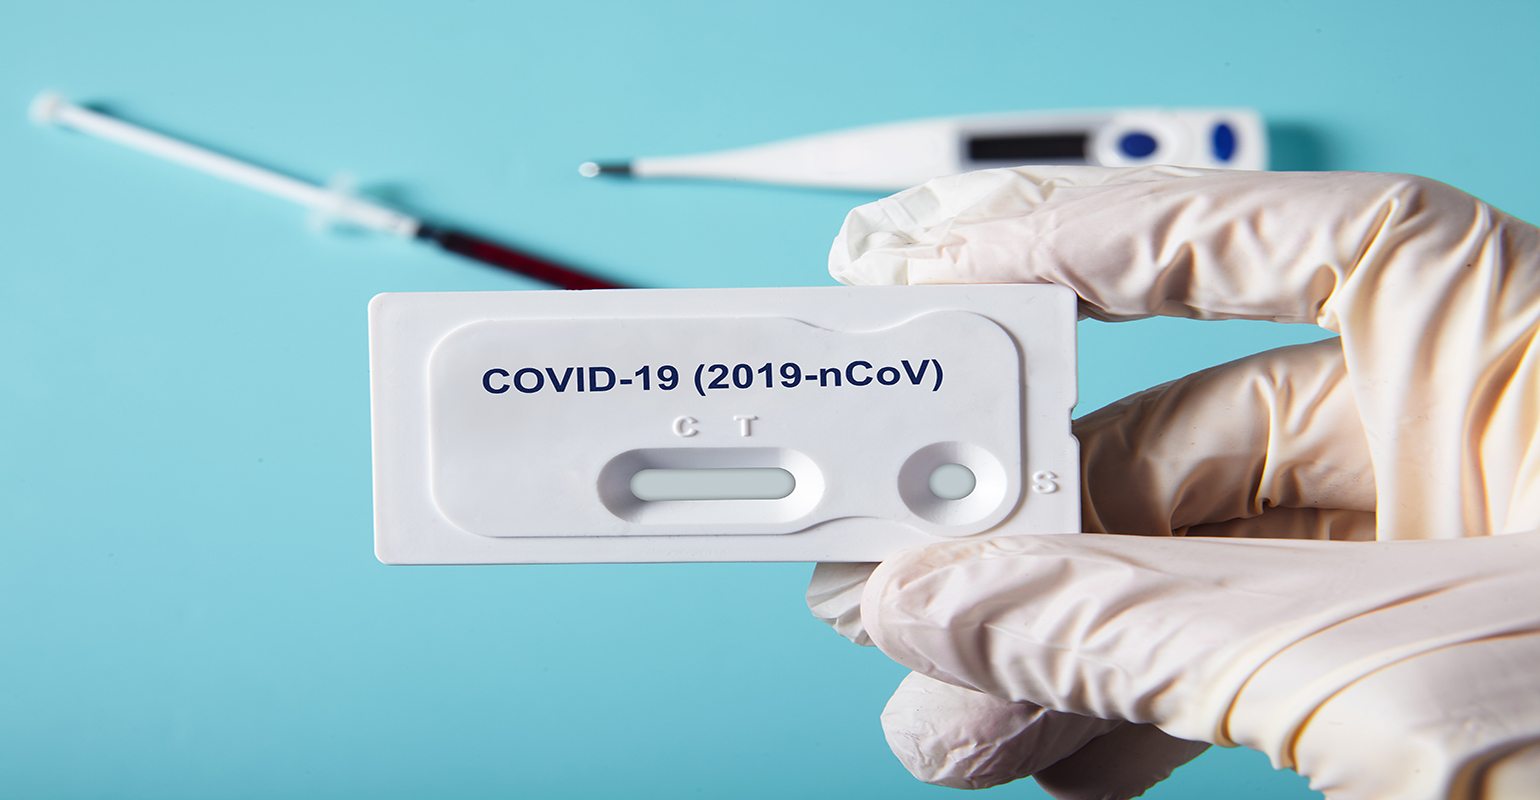 Coronavirus Test Kits Effective Way To Monitor The Pandemic Omnia Health Insights News From The Global Healthcare Community